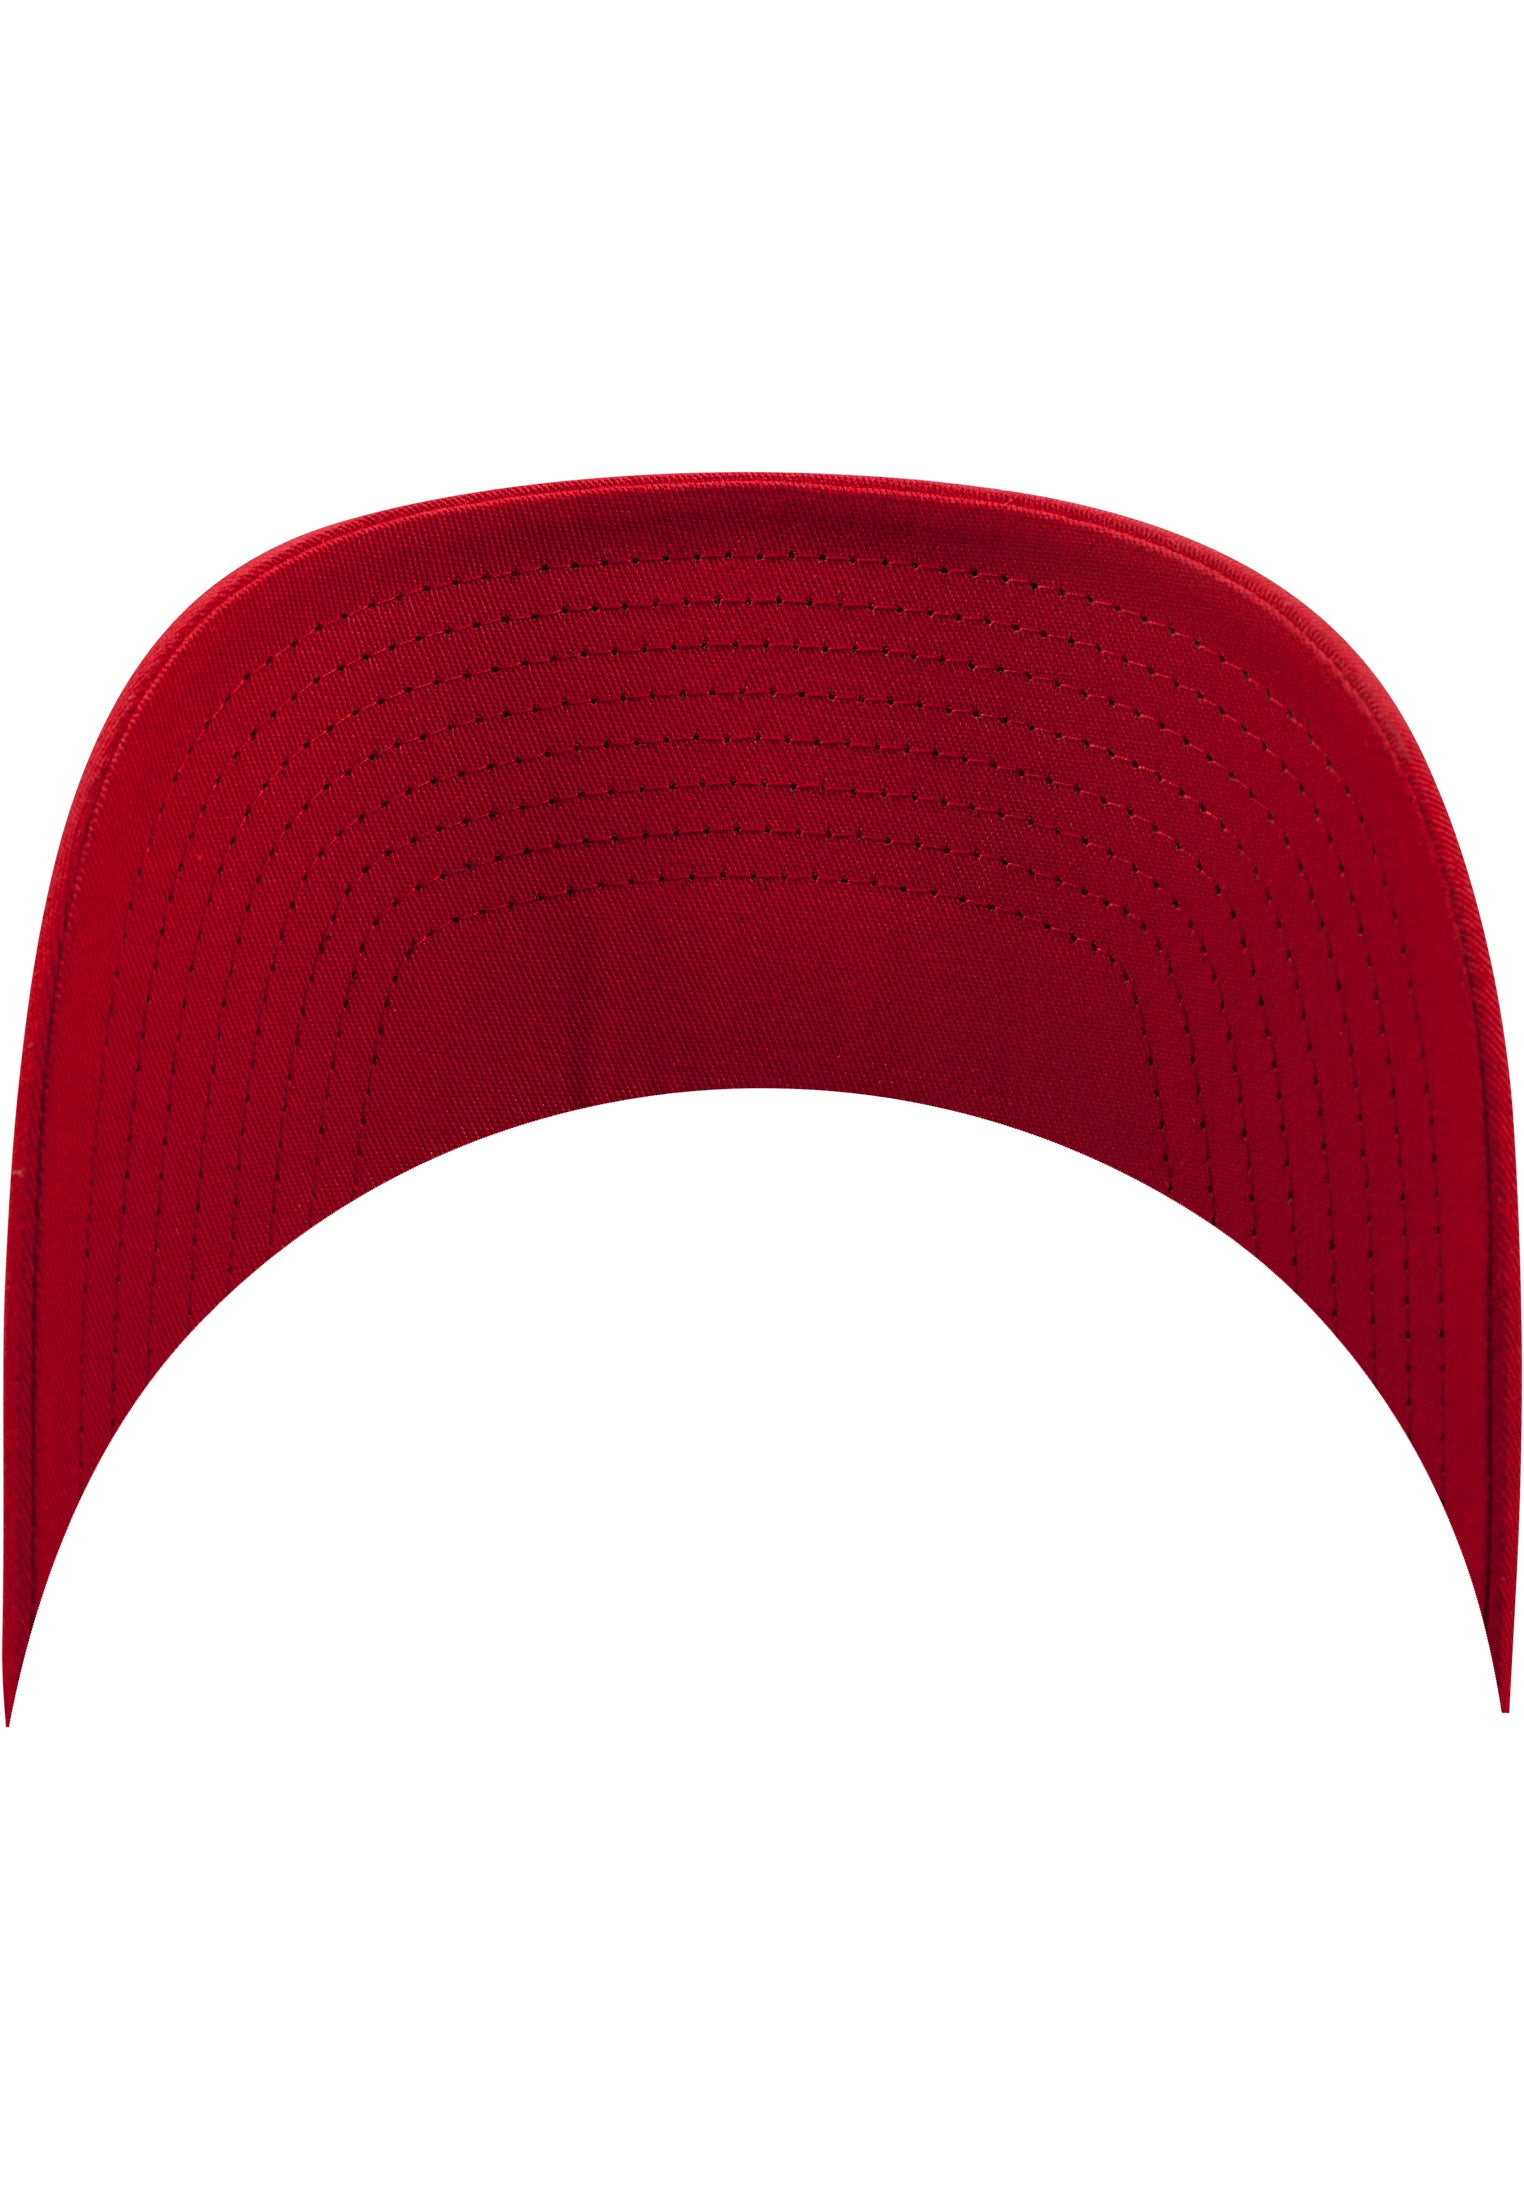 Curved Classic Snapback - Red - Headz Up 